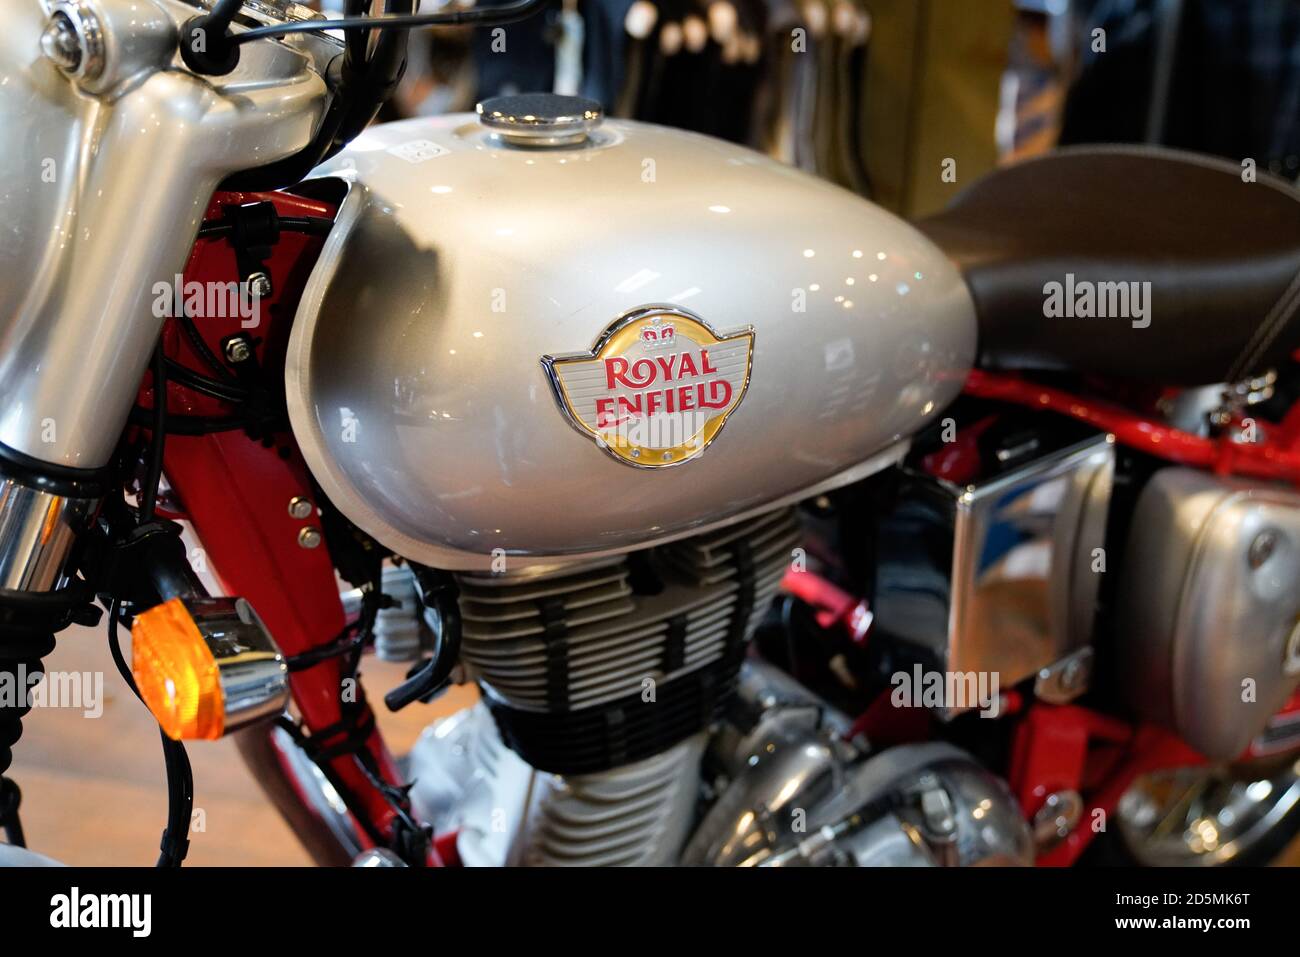 Bordeaux , Aquitaine / France - 10 01 2020 : Royal Enfield logo and sign text on grey retro motorcycle fuel tank of vintage motorbike Stock Photo